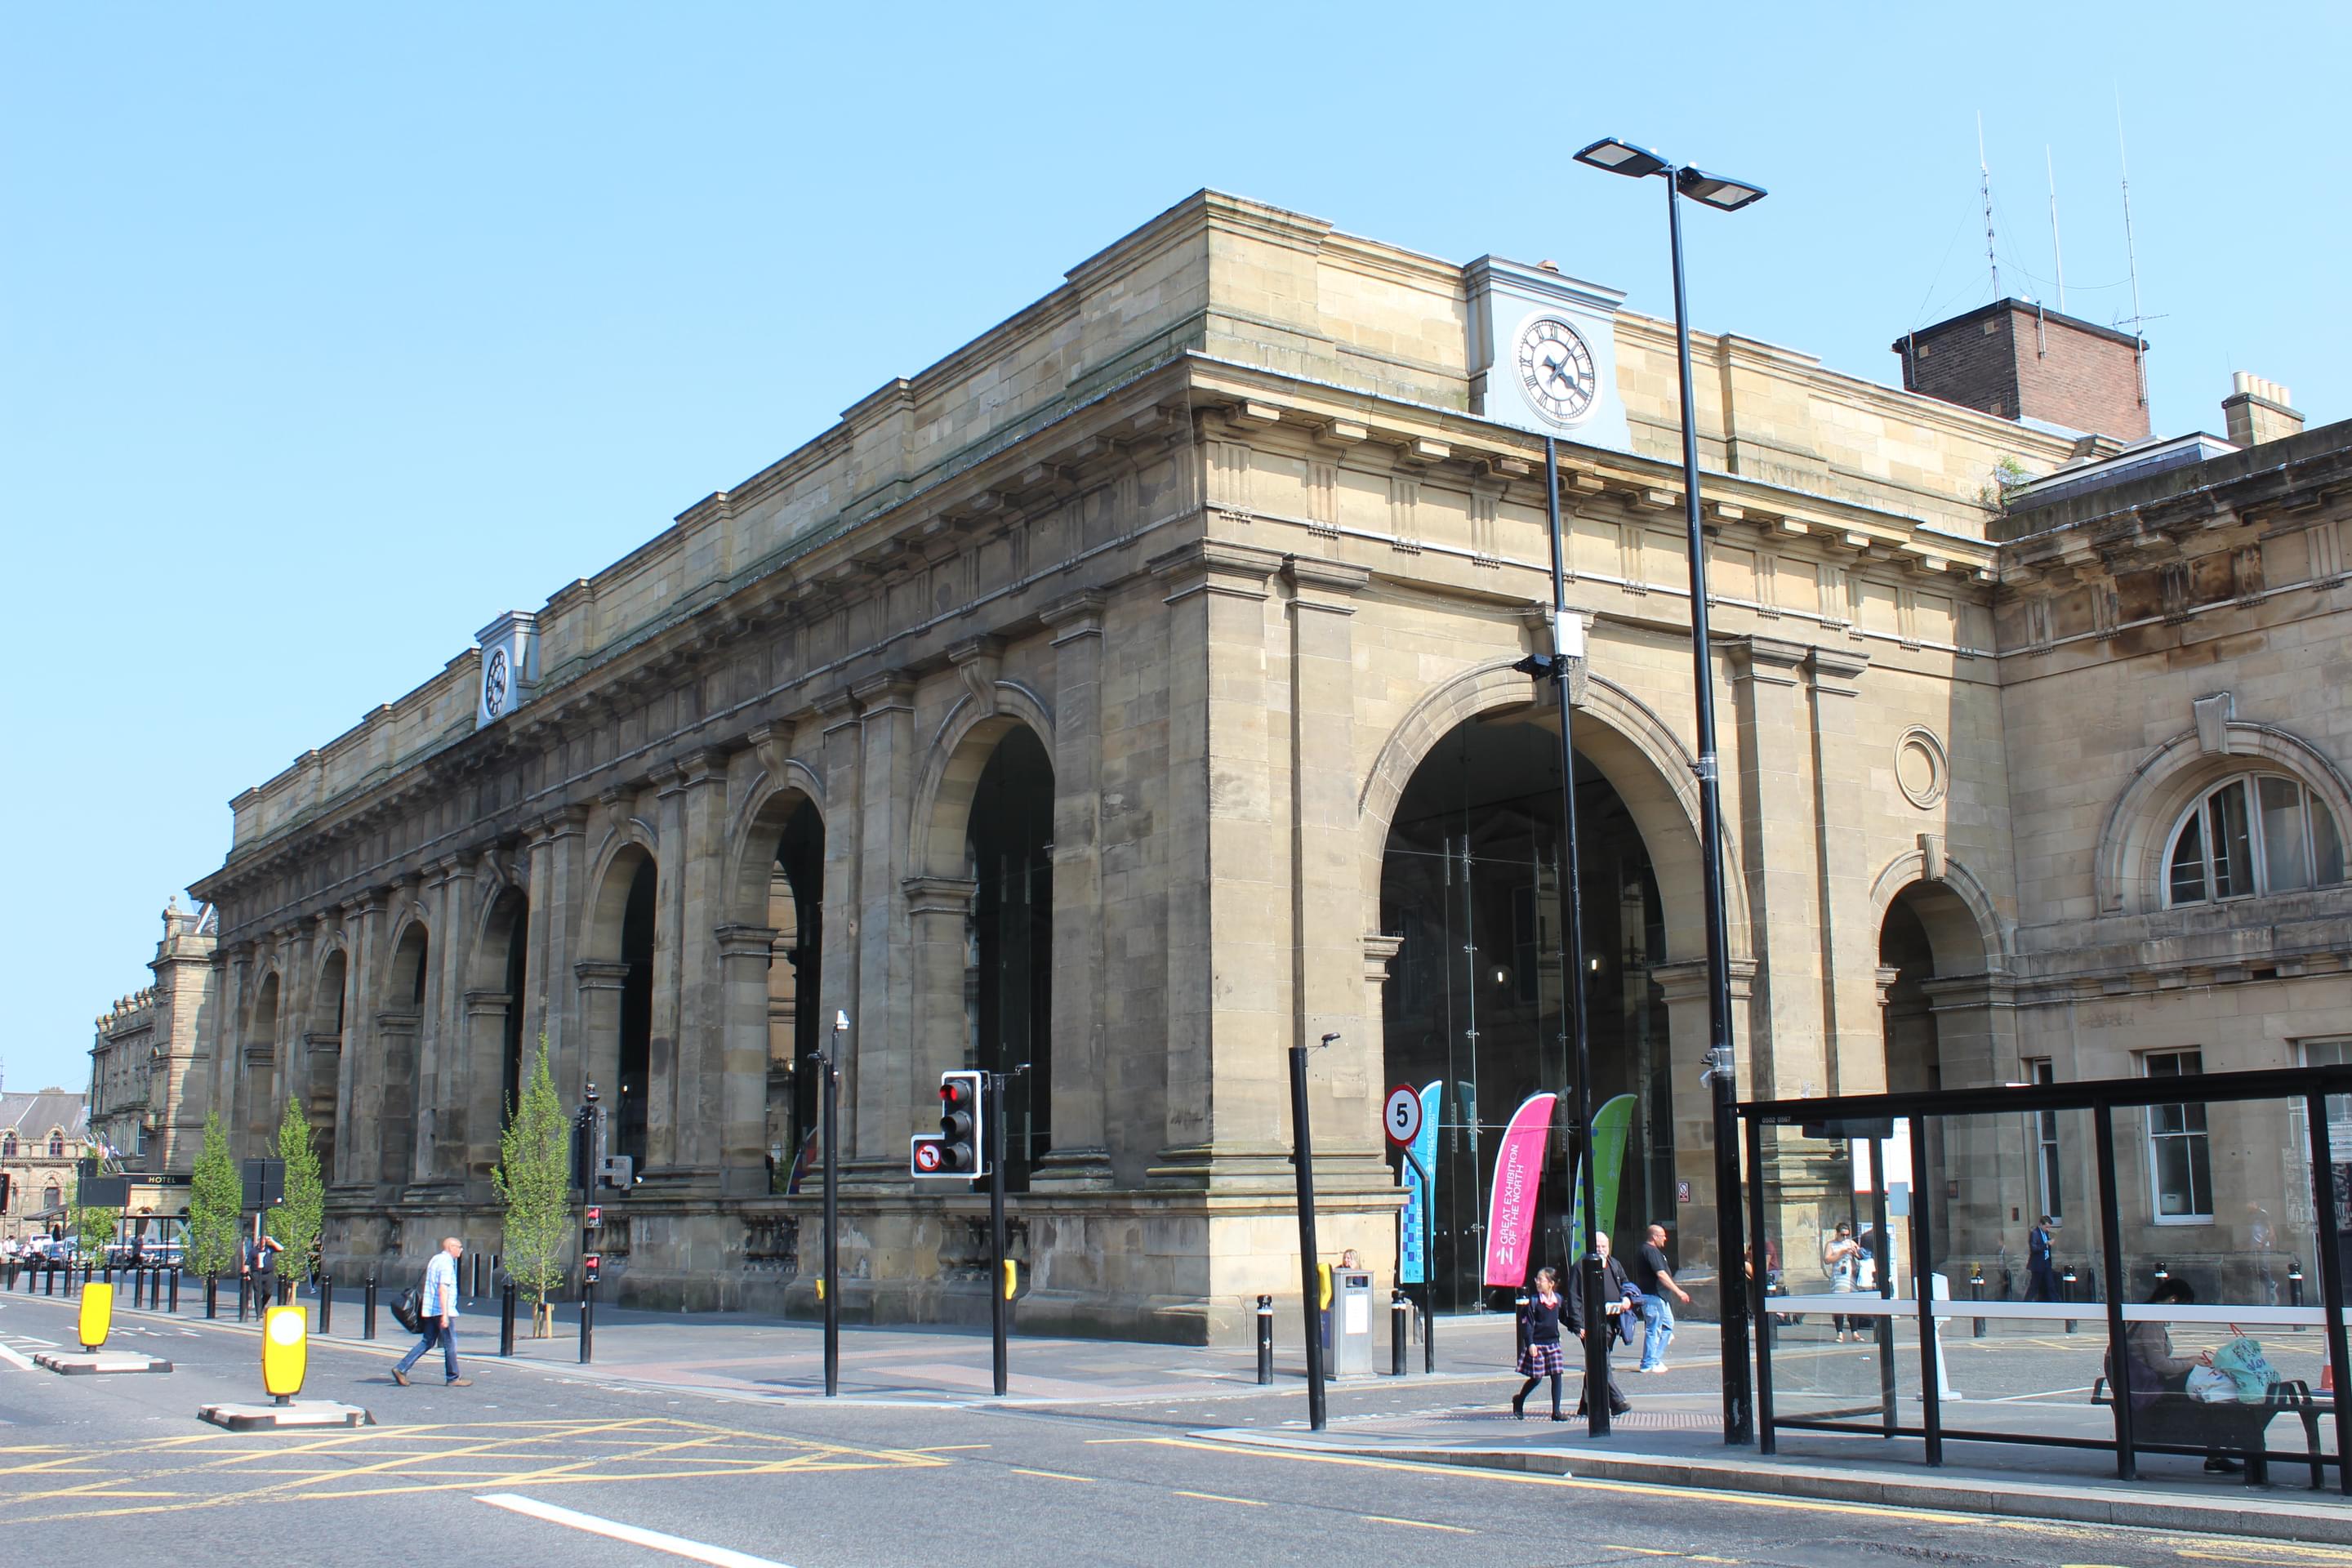 Newcastle Central Station Overview